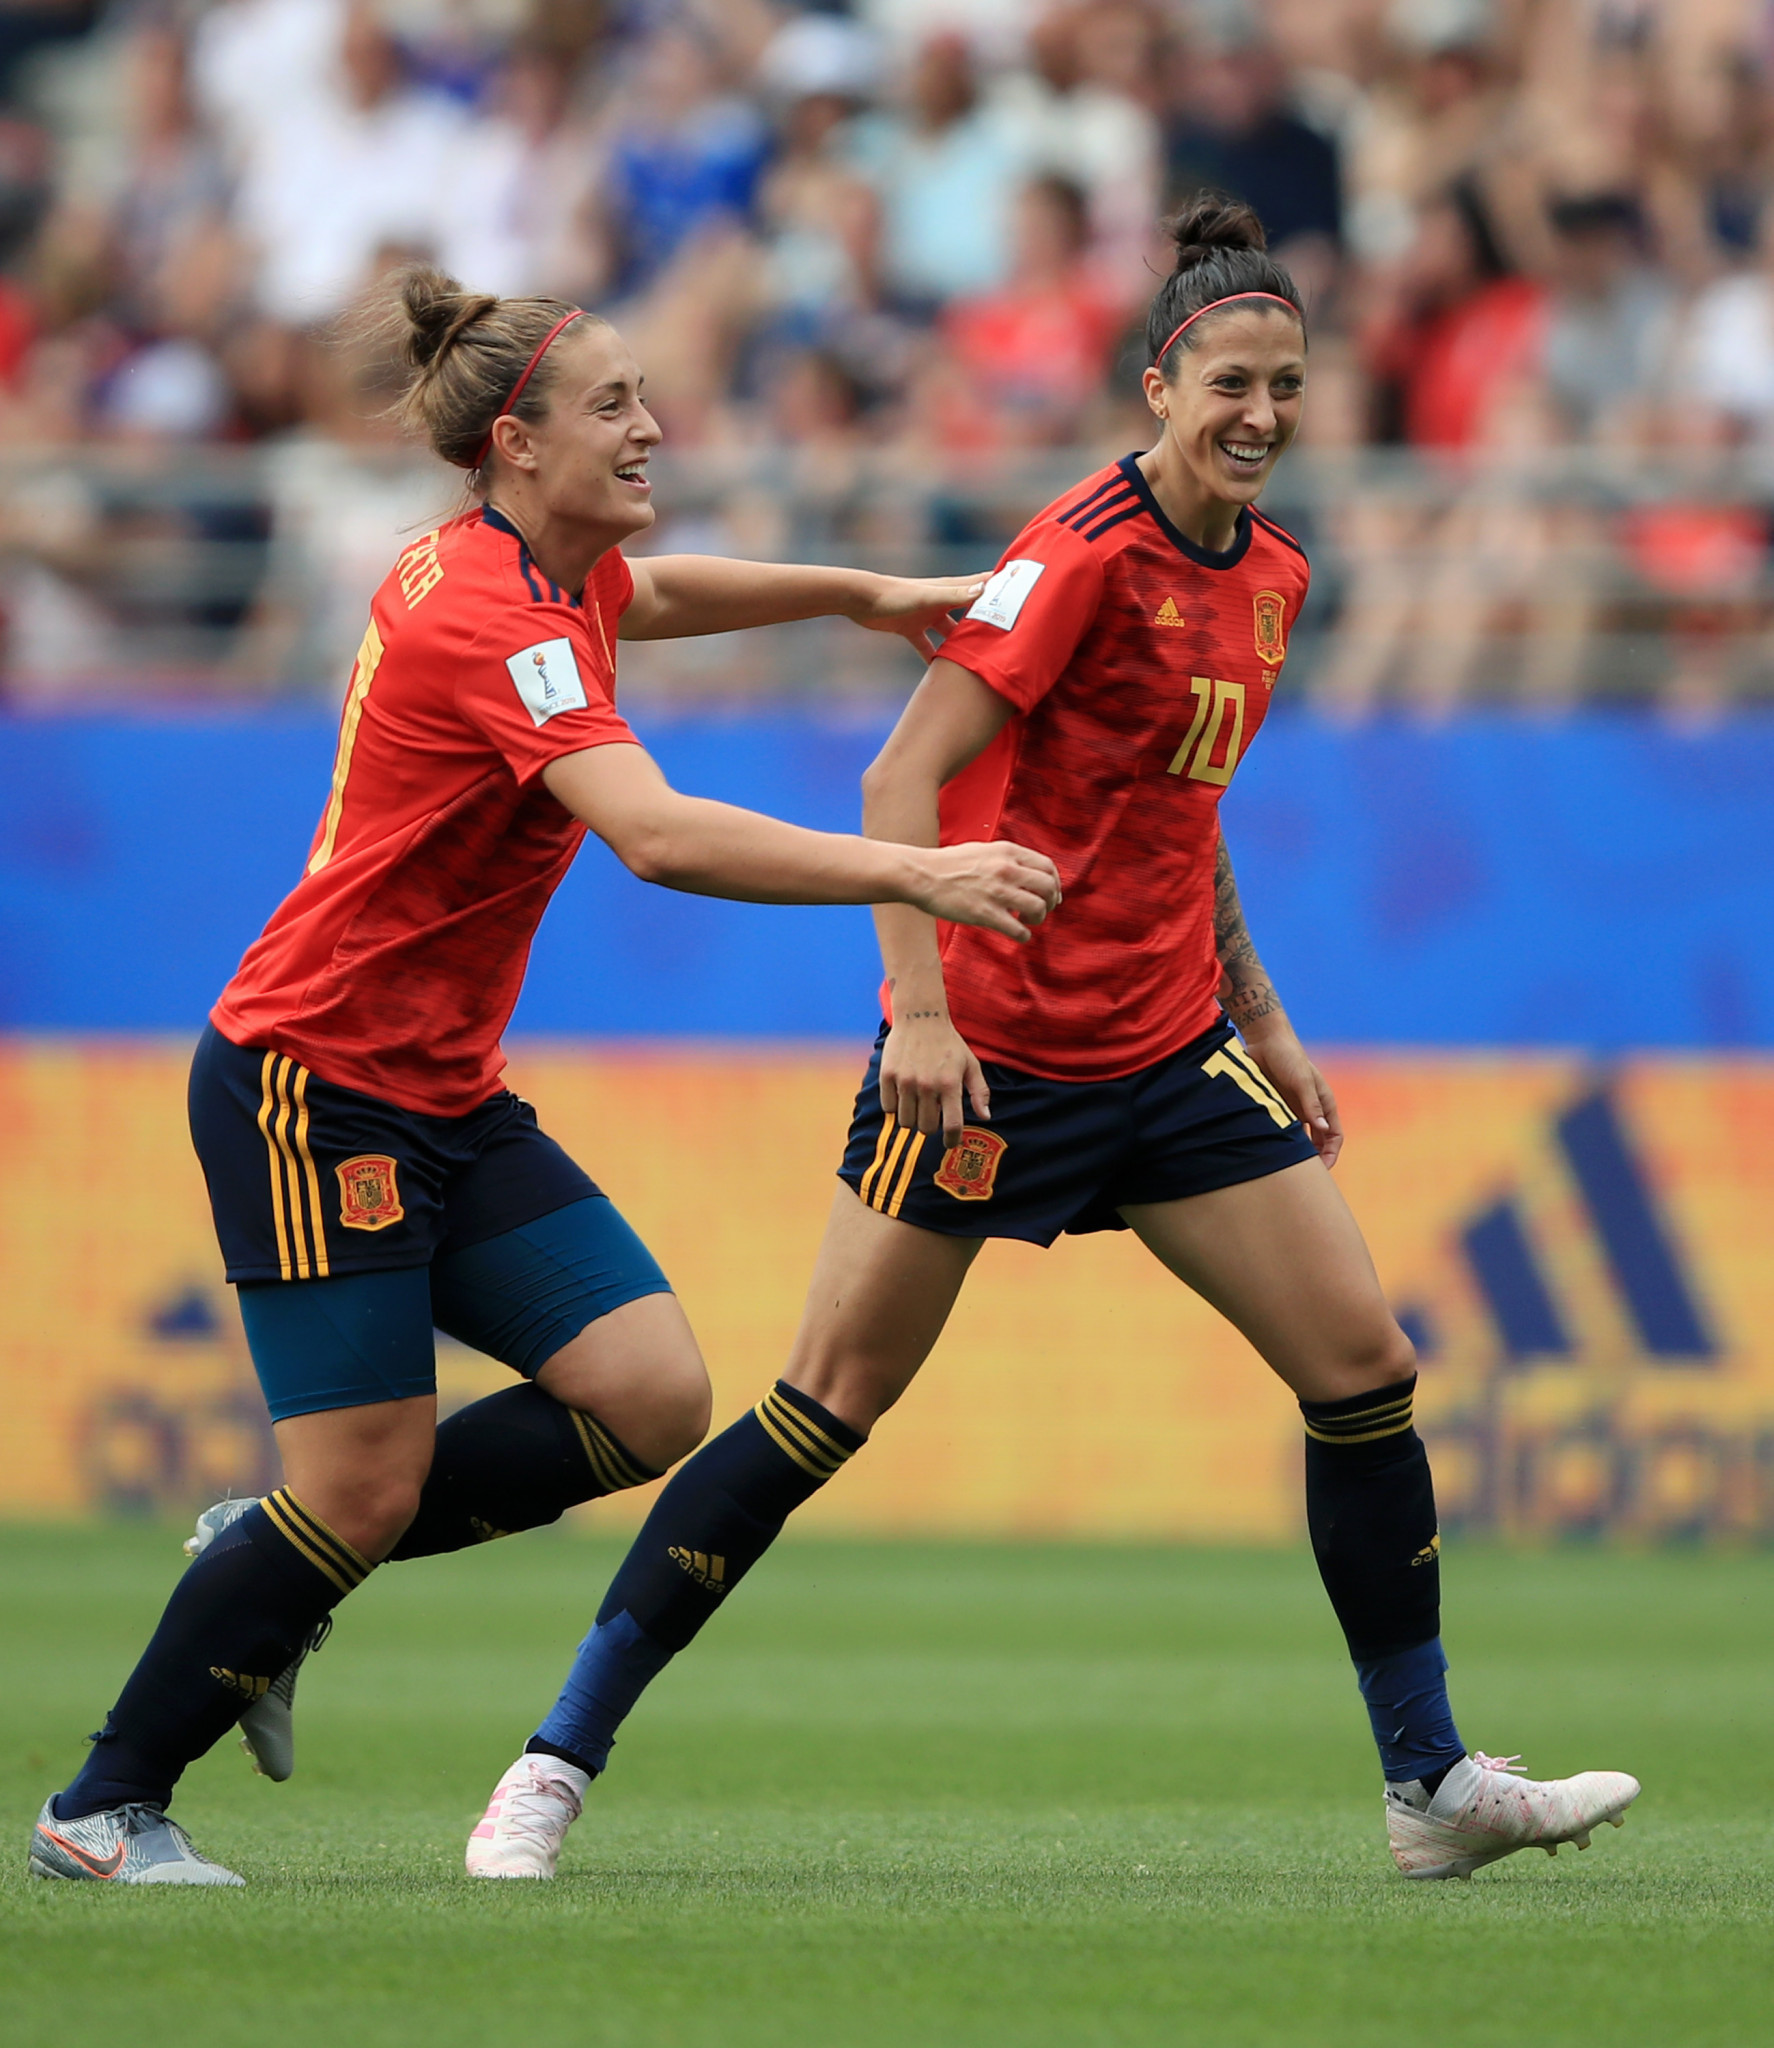 But Spain were level less than three minutes later when Jennifer Hermoso fired home ©Getty Images